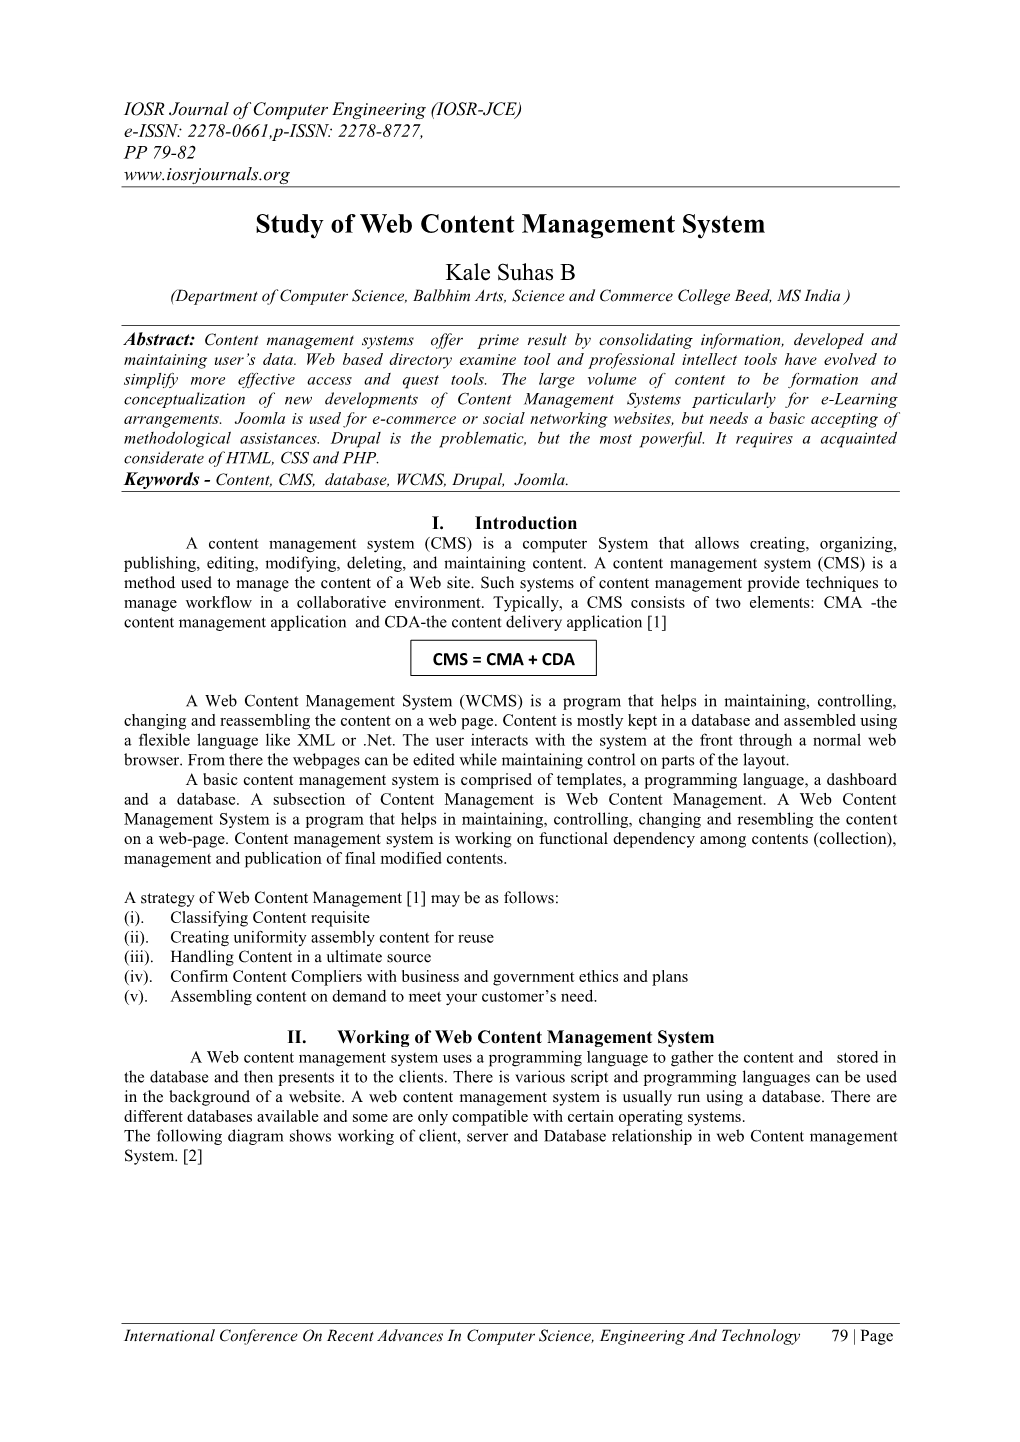 Study of Web Content Management System